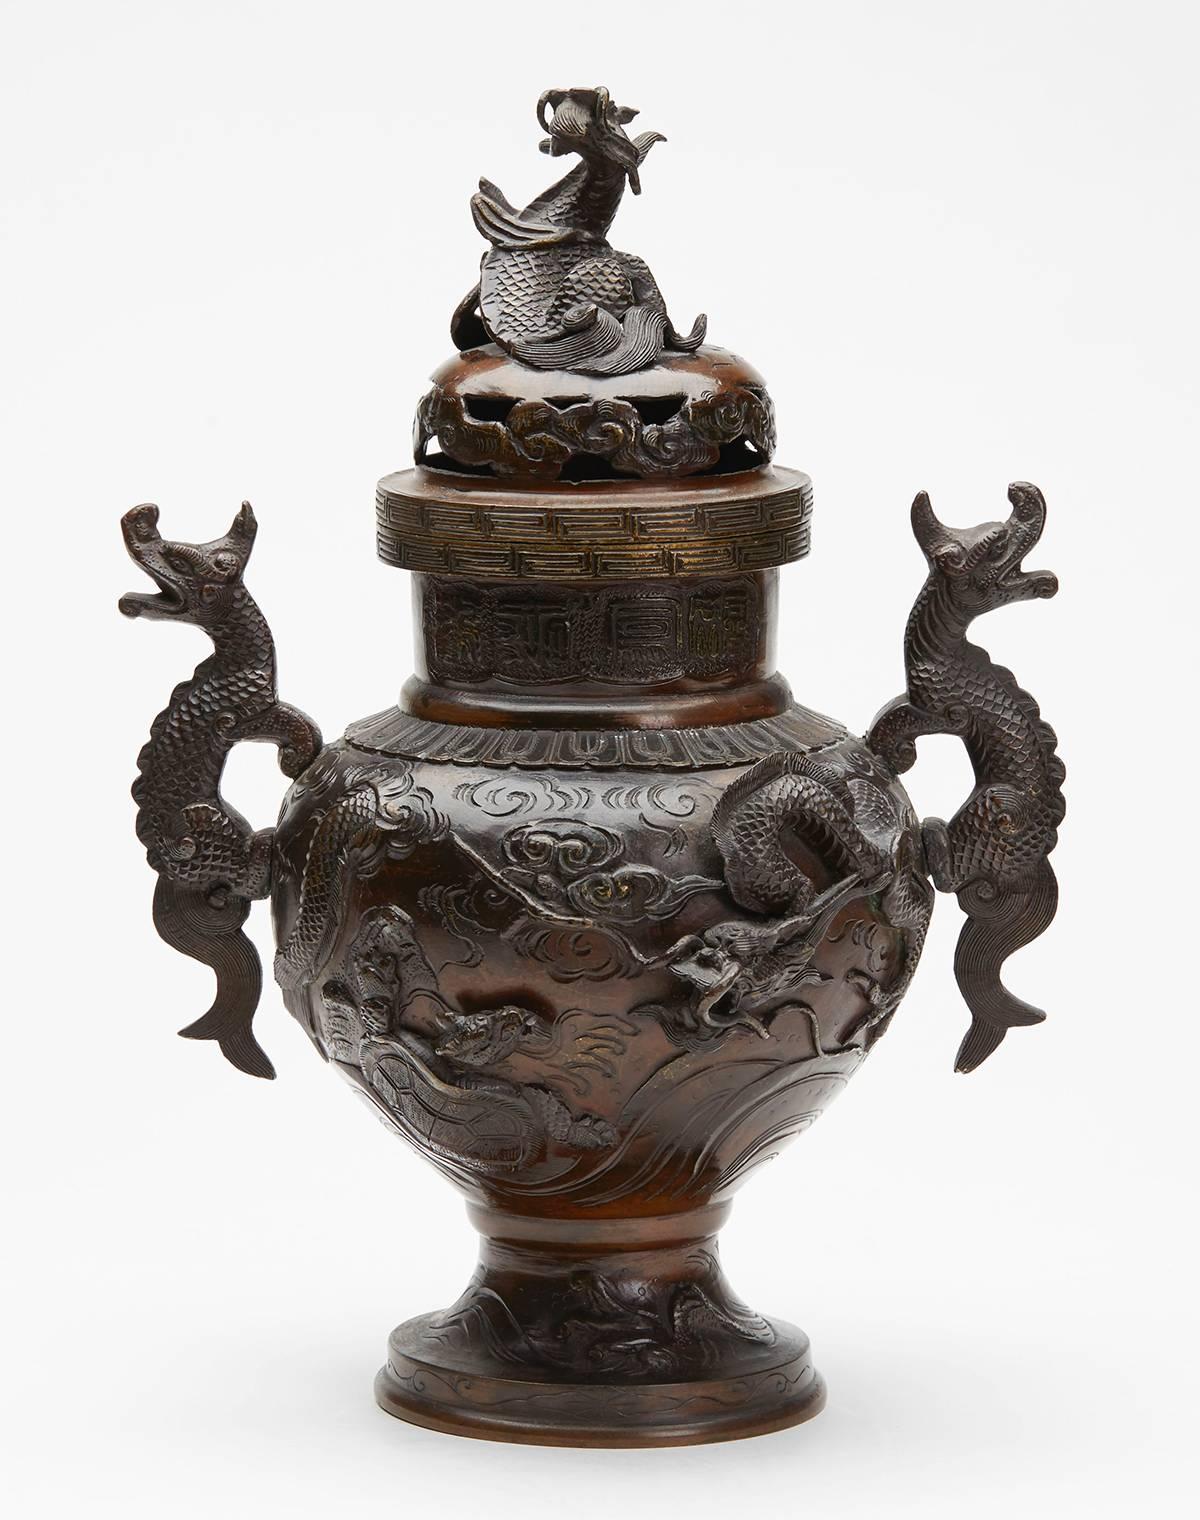 A stunning garniture three antique Japanese bronze vases, one lidded, with dragon handles, moulded in relief with dragons, phoenix birds and minogame (mythical turtles) set within moulded and scroll designs with moulded script around the neck. The